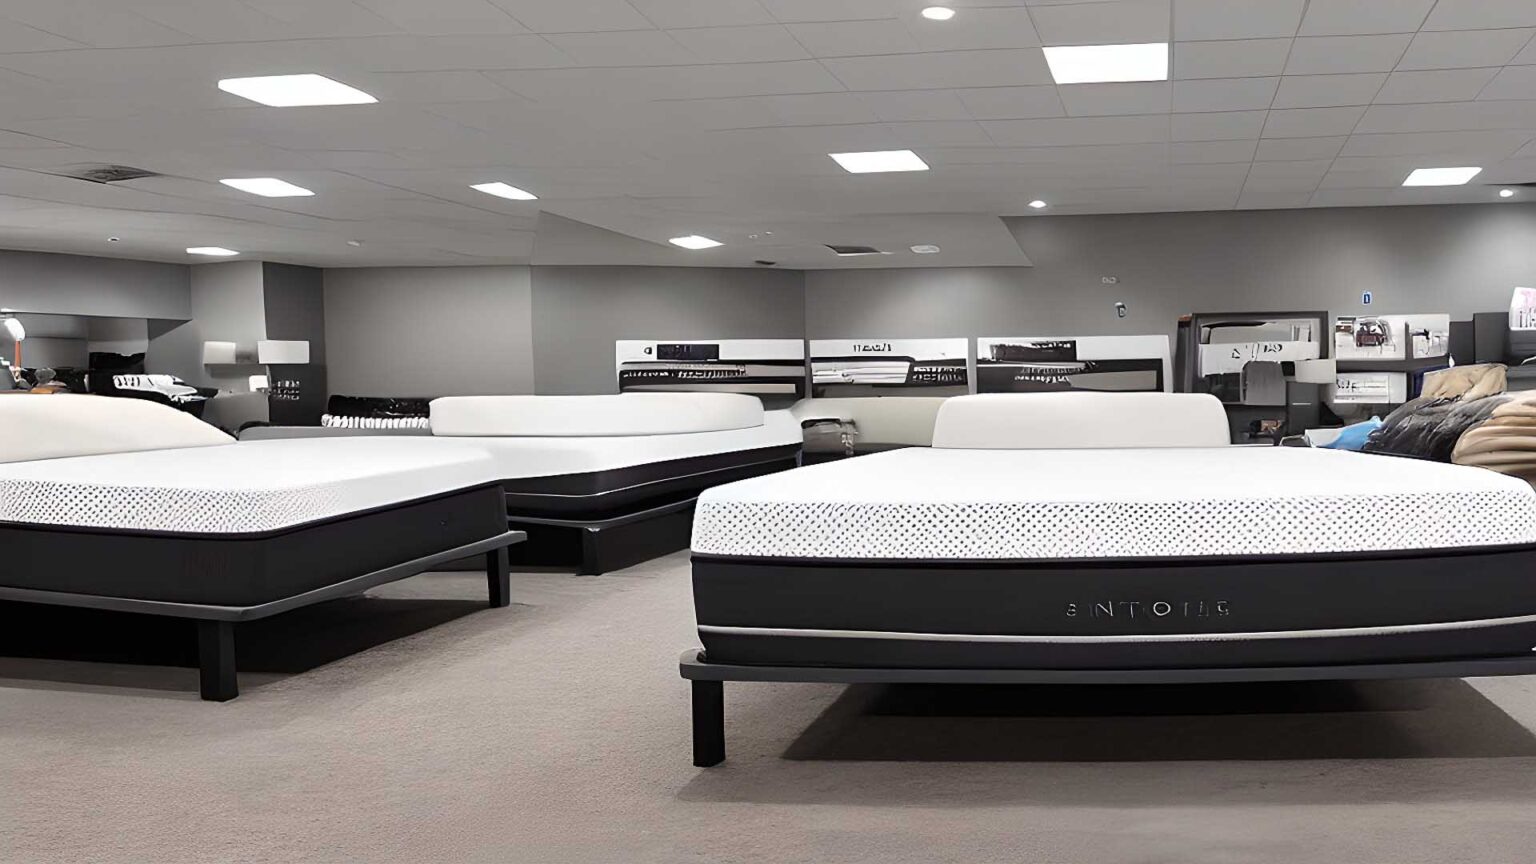 Mattress Stores, mattress dealers, and mattress retailers near me in Broomfield, CO